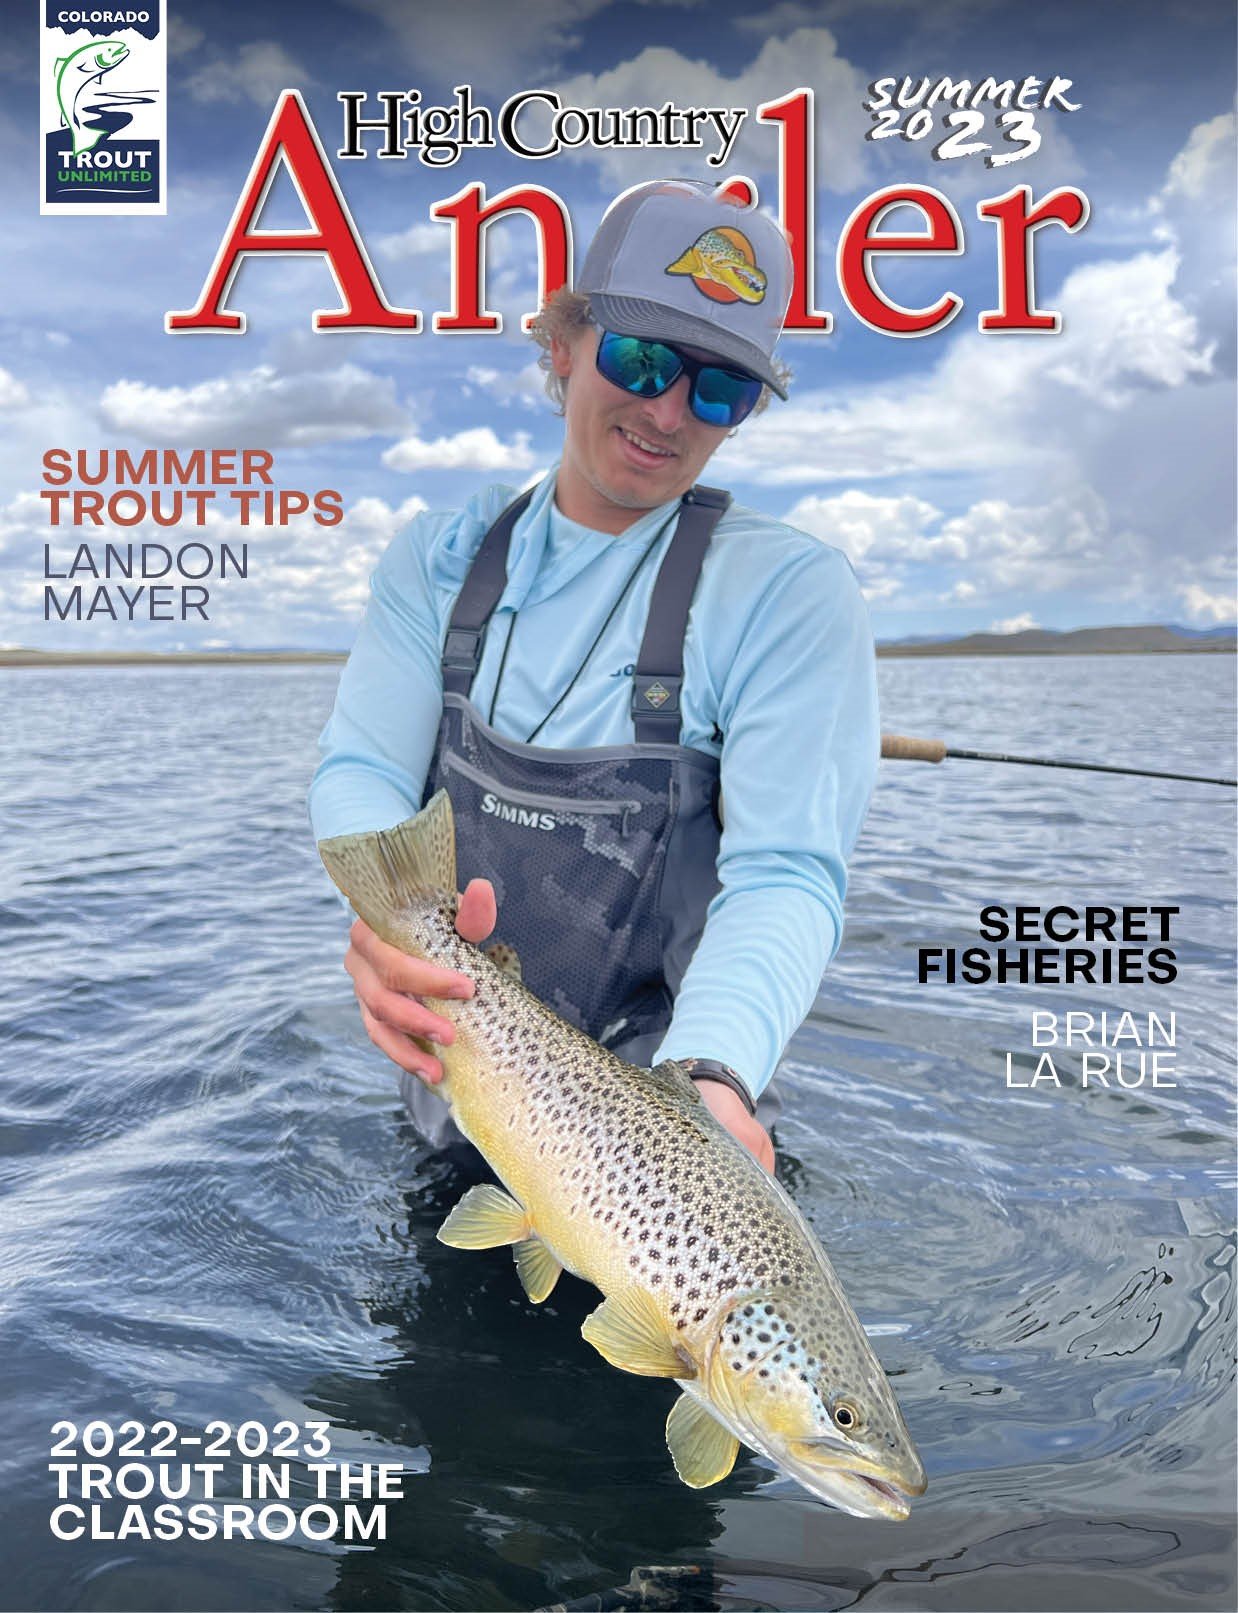 high country angler — Blog — Colorado Trout Unlimited